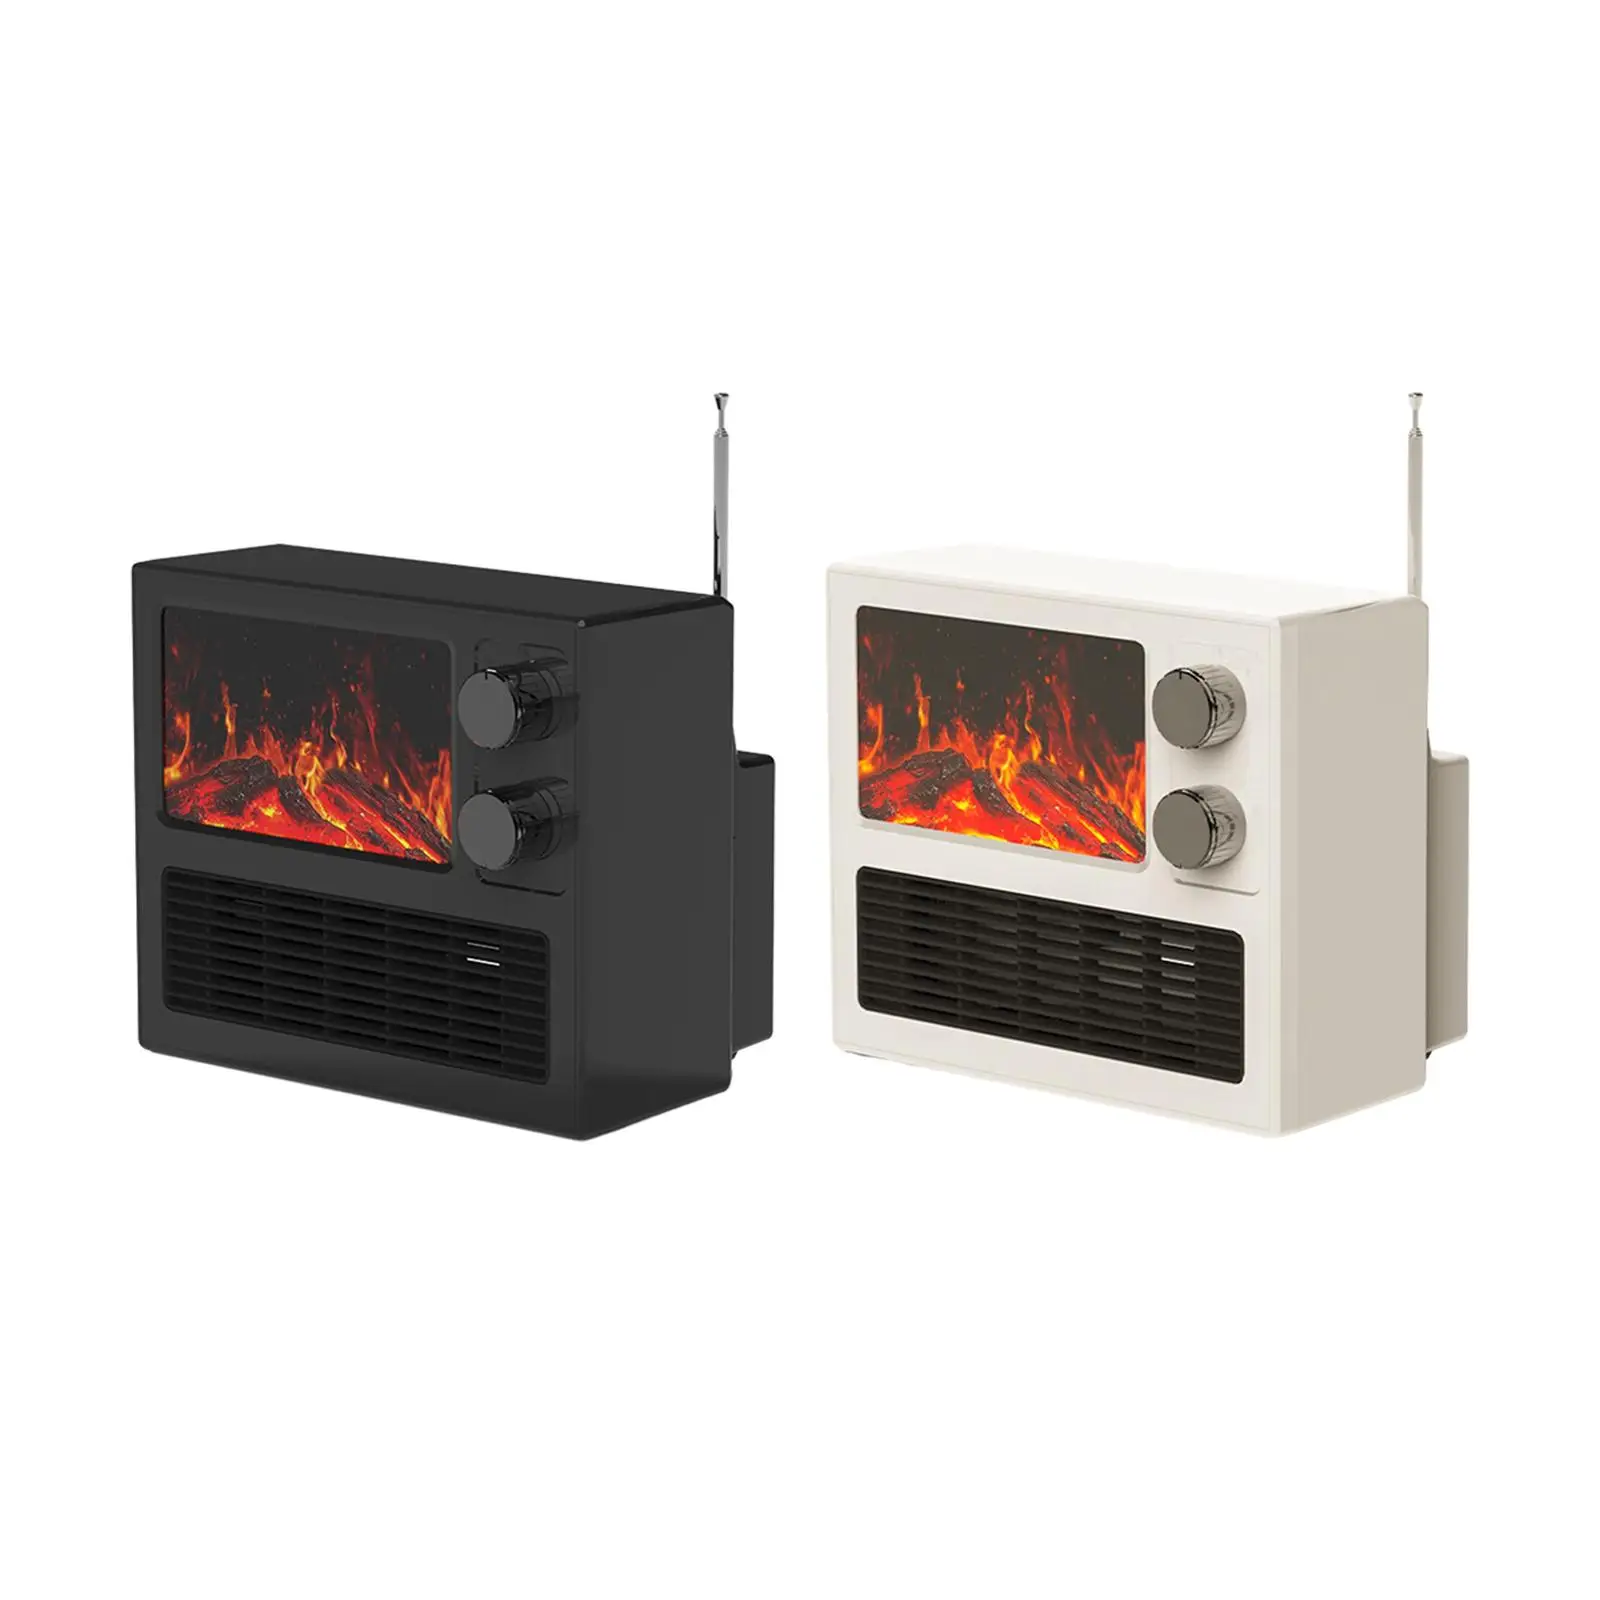 Small Electric Fireplace Freestanding Quiet with Flame Effect 1000W Space Heater for Office Dormitory Apartment Farmhouse Home